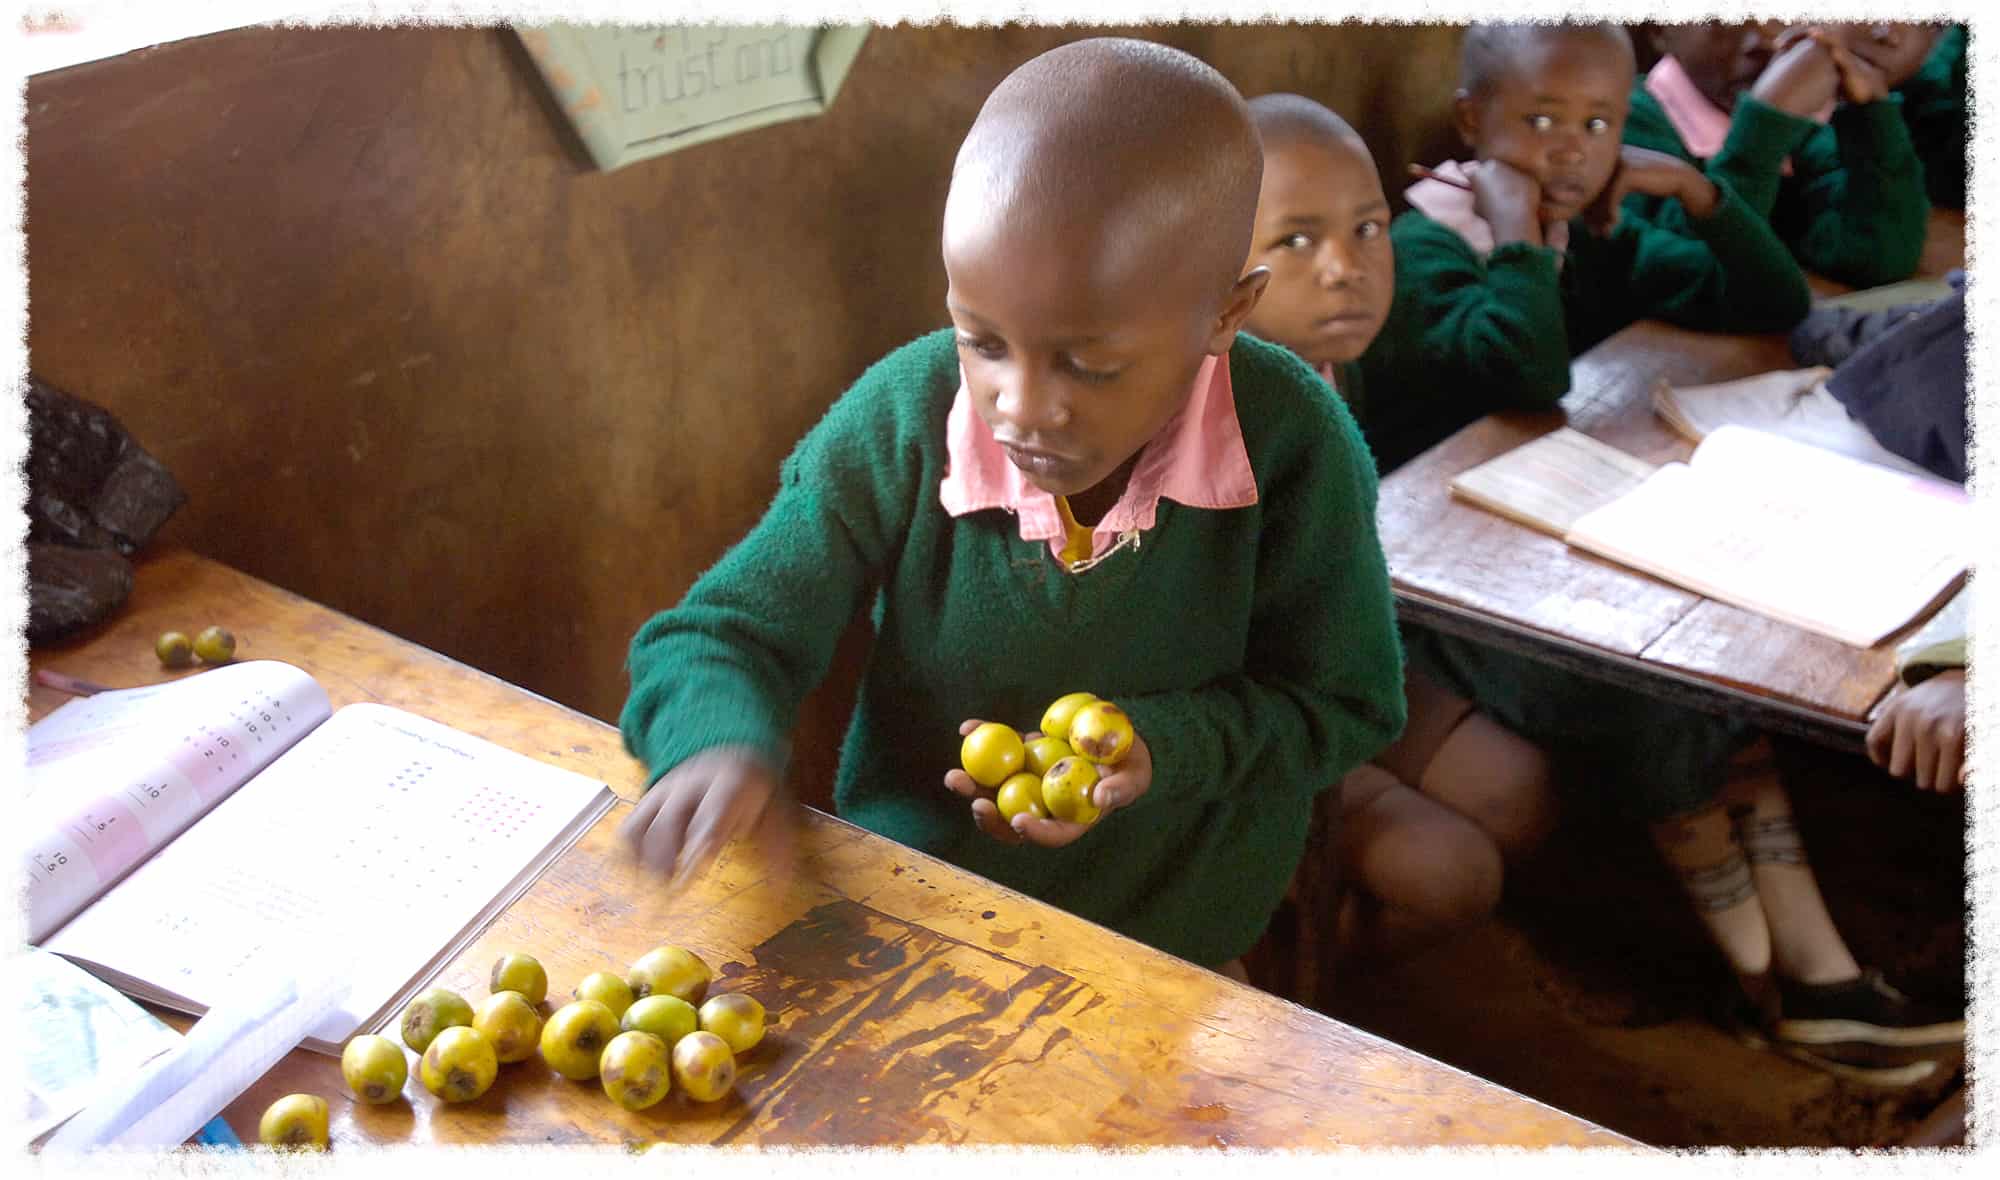 Nine-year-old Alex is learning math by counting fruits that grow on trees in his village in Kenya